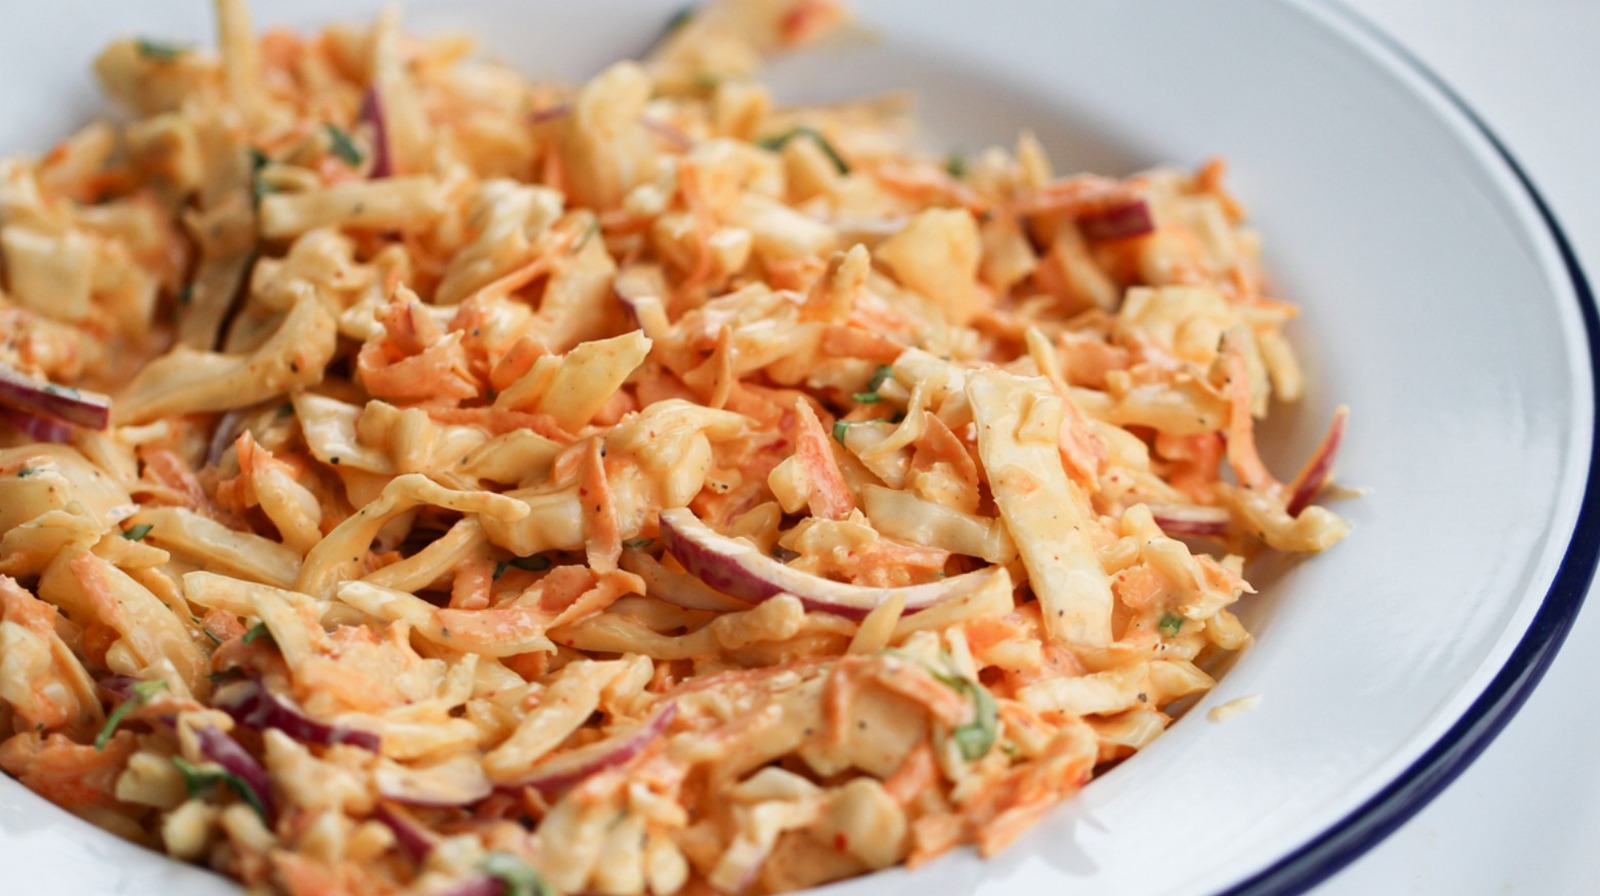 Bobby Flay's Coleslaw With A Twist image